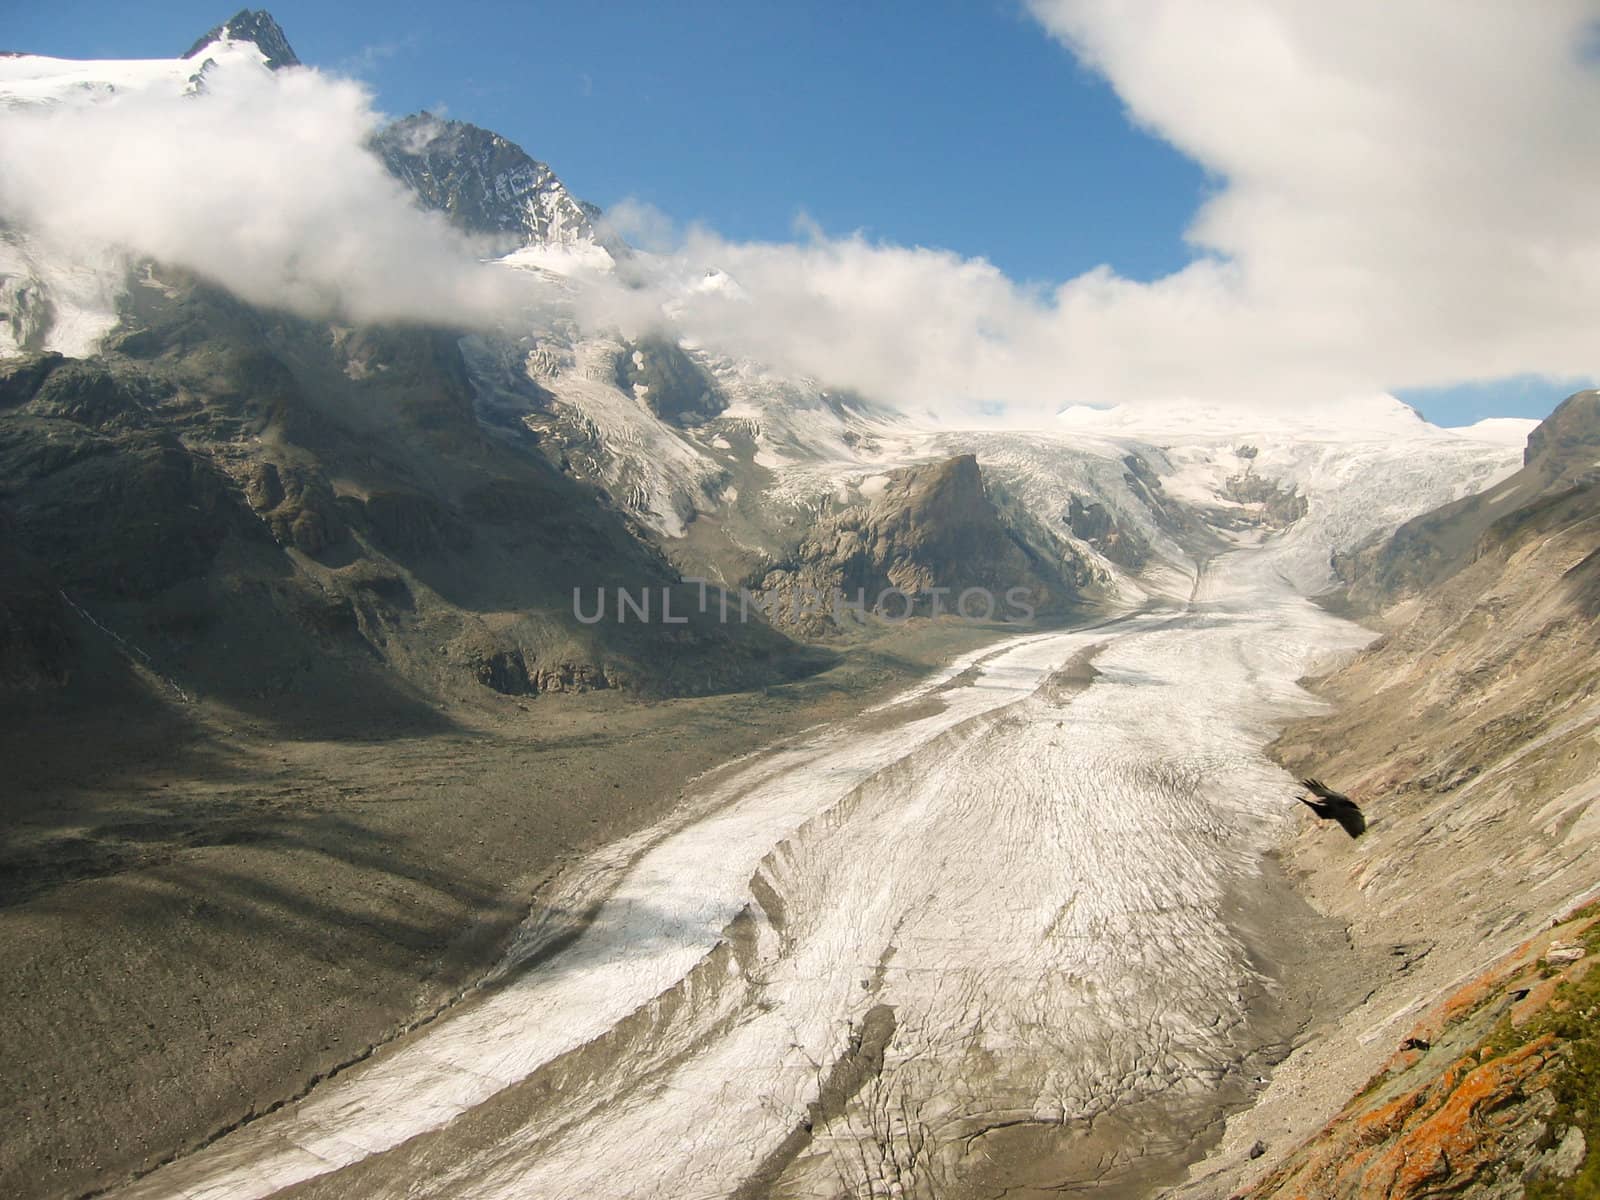 glacier vally with top covered in  fluffy clouds